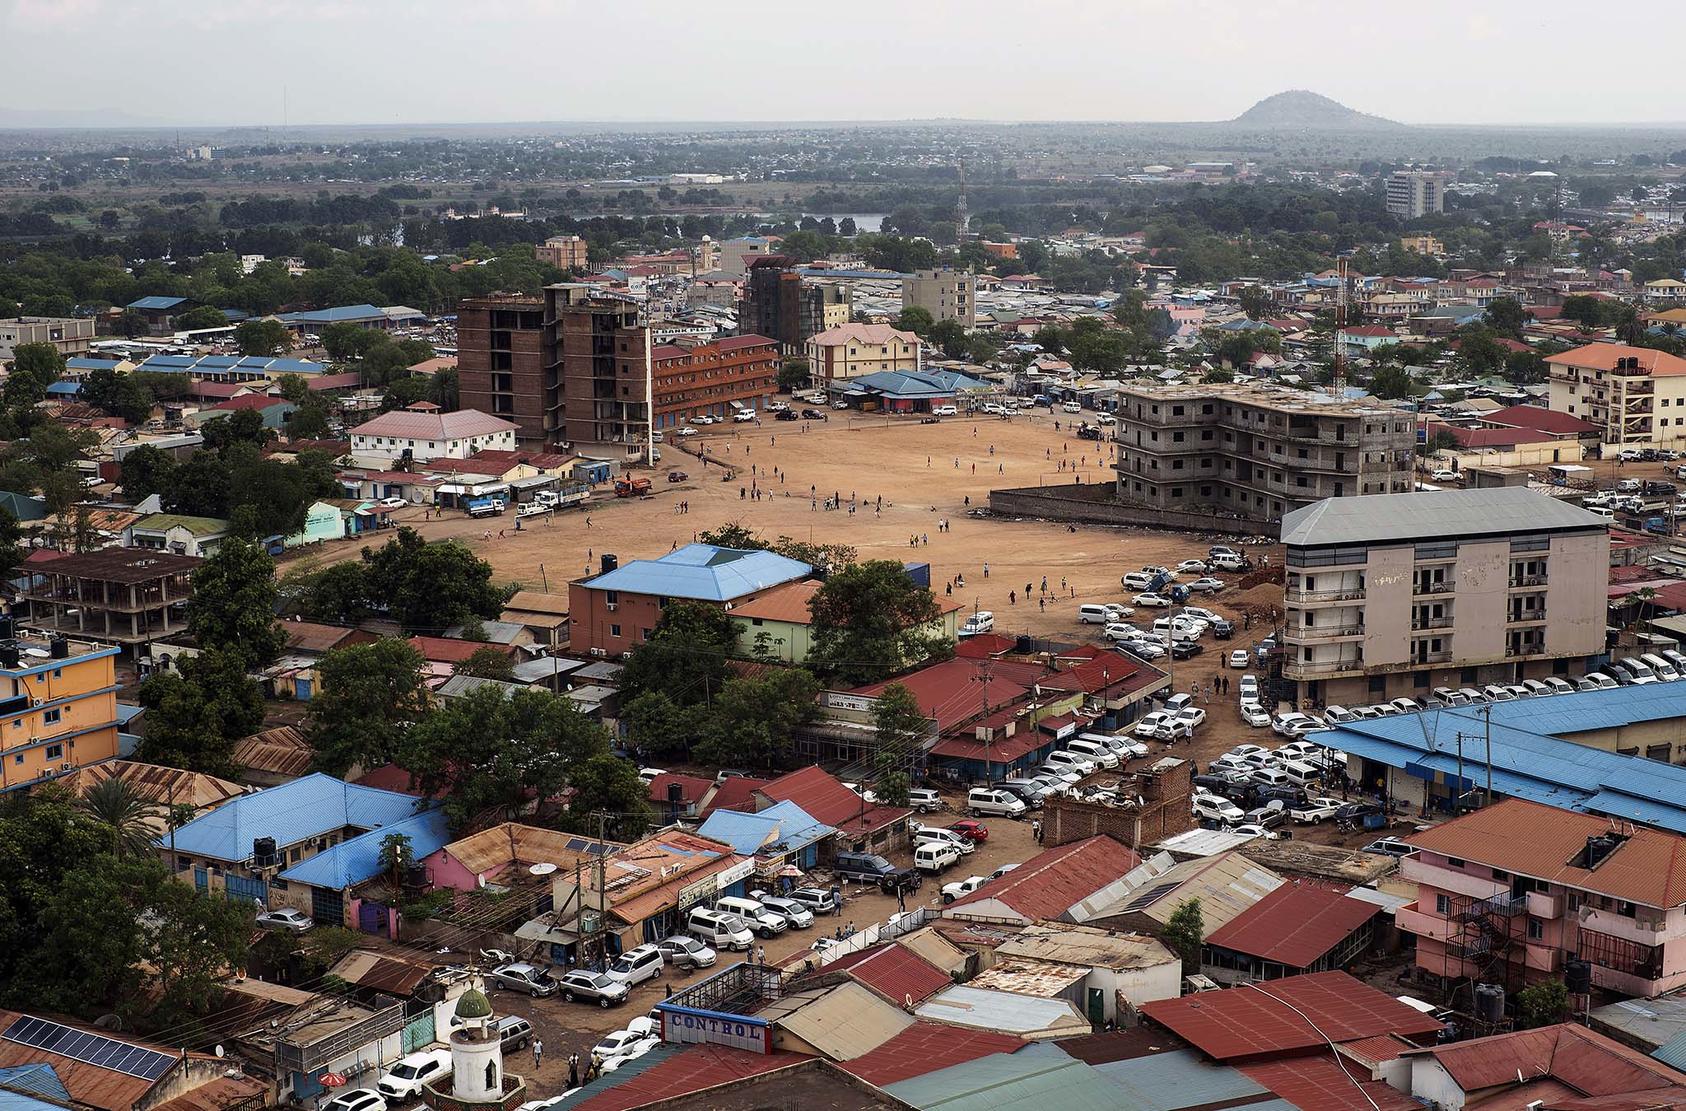 An overview of South Sudan's capital city, Juba, on March 21, 2018. (Kassie Bracken/The New York Times)